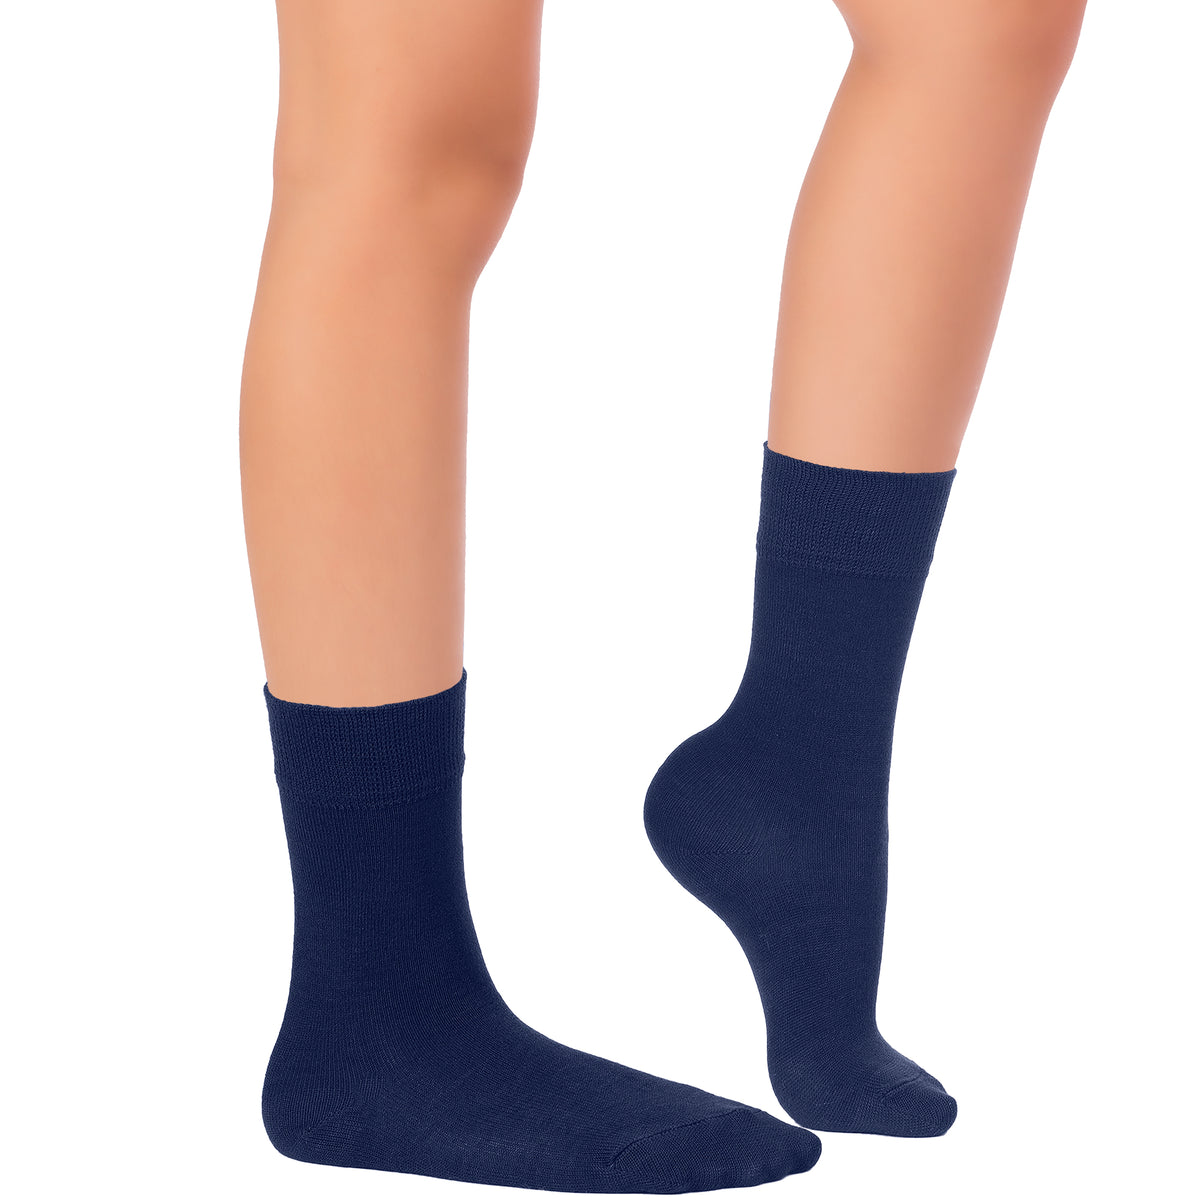 These navy blue cotton socks are designed for women and made with high-quality bamboo material. Perfect for formal occasions or everyday wear.